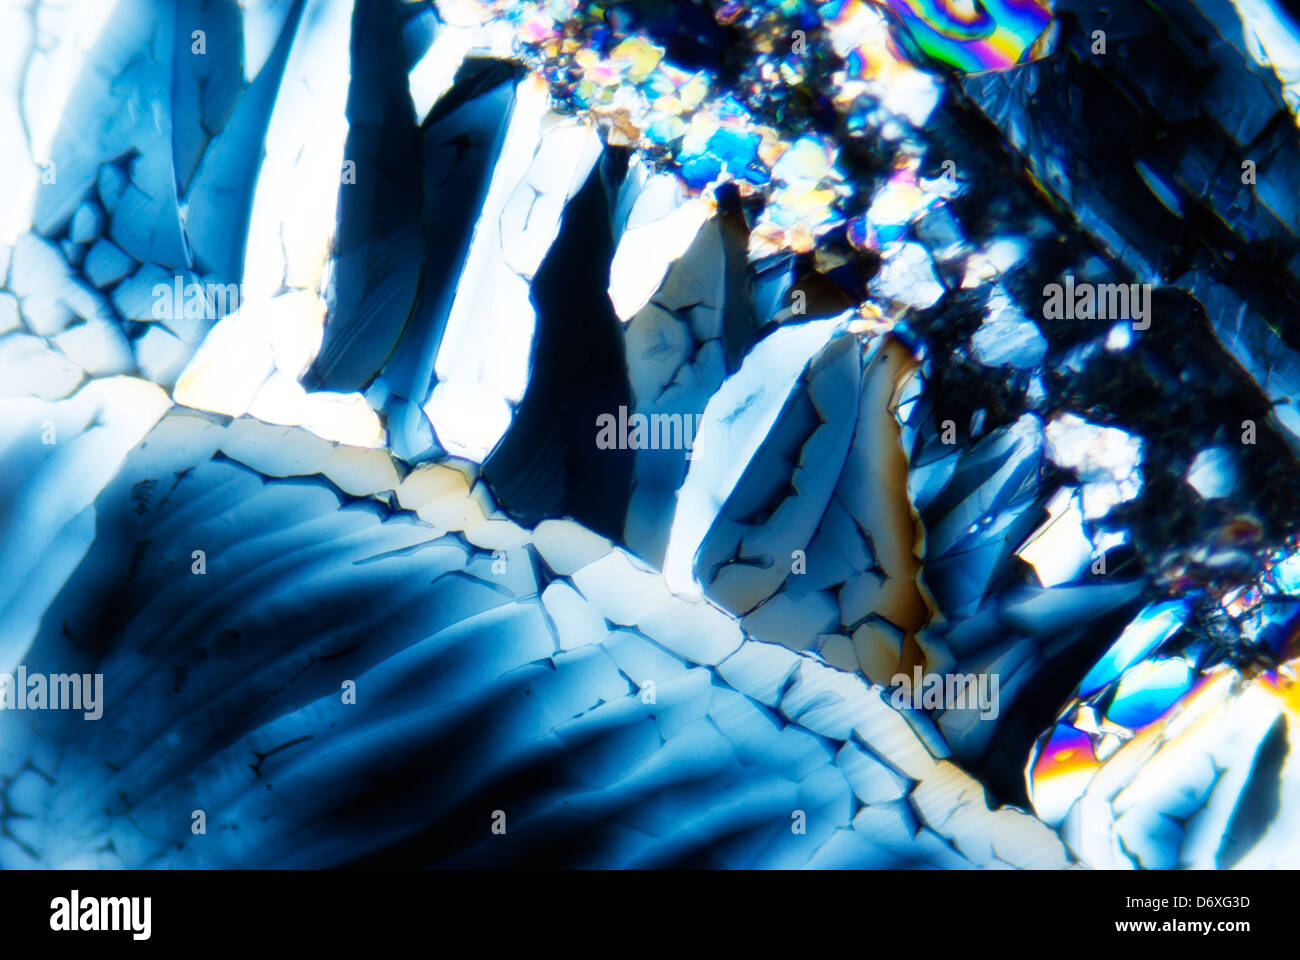 Microcrystals of Magnesiumsulfat Heptahydrat in polarized light Stock Photo